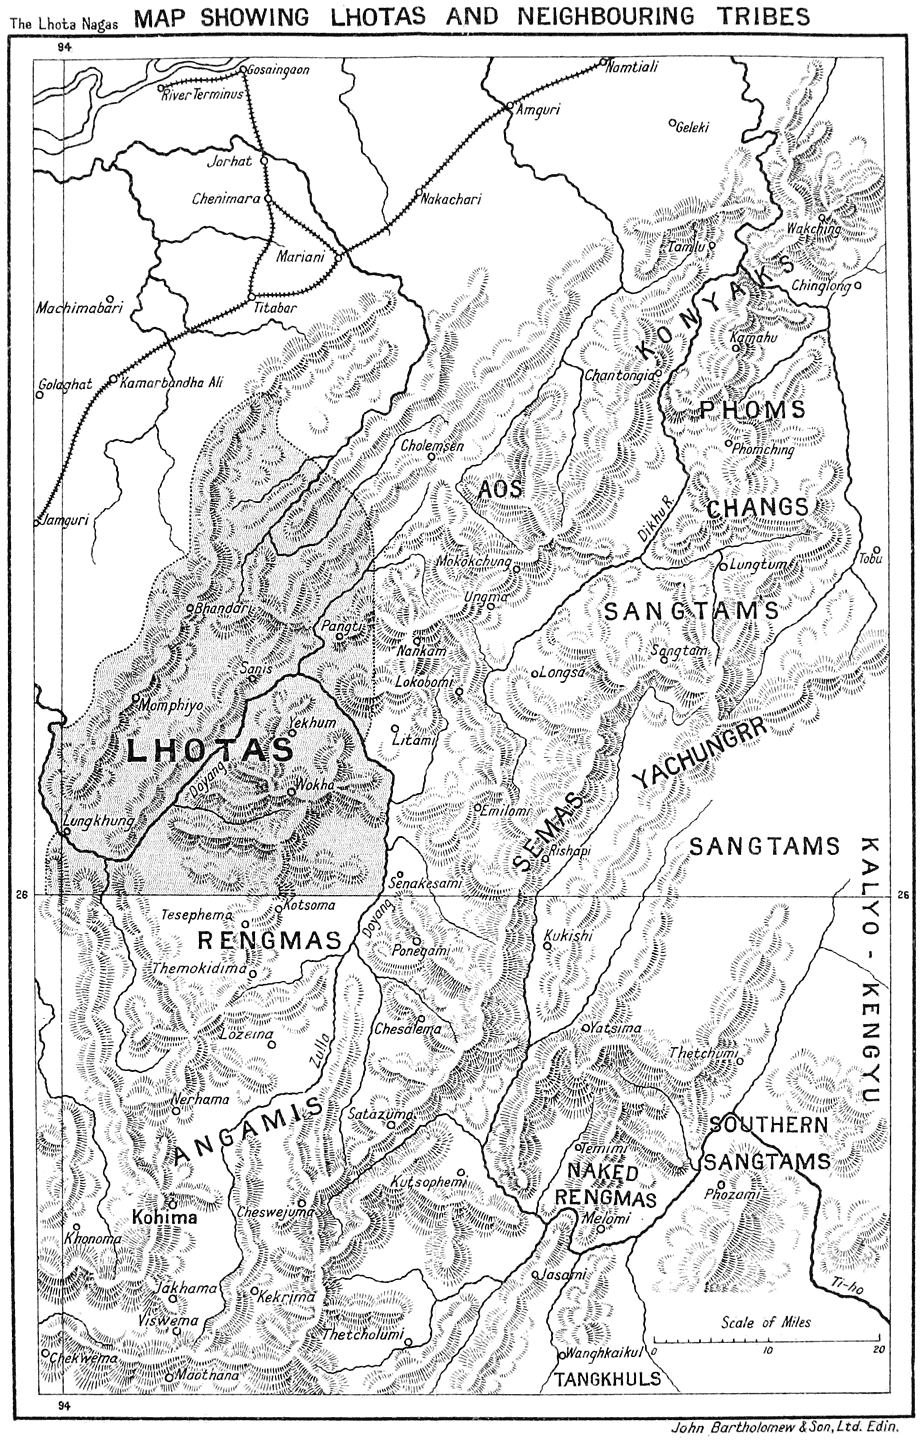 MAP SHOWING LHOTAS AND NEIGHBOURING TRIBES